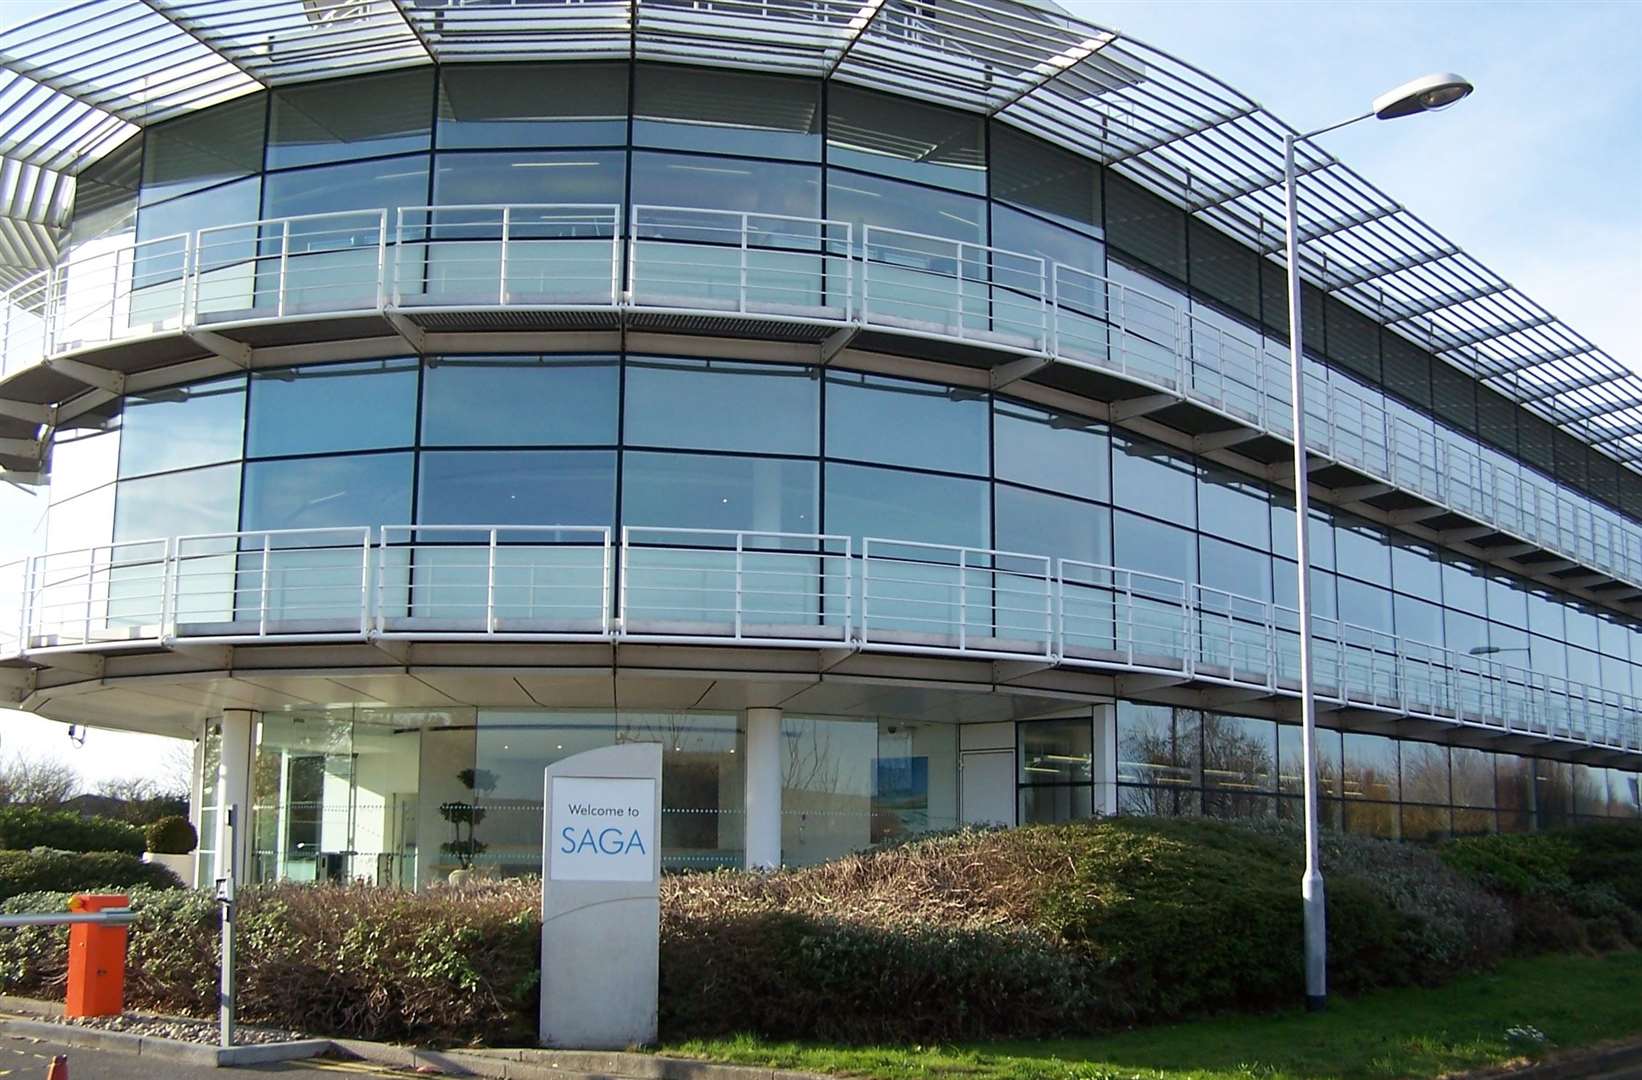 The former offices of Saga at Cheriton Parc in Folkestone. Picture: Saga